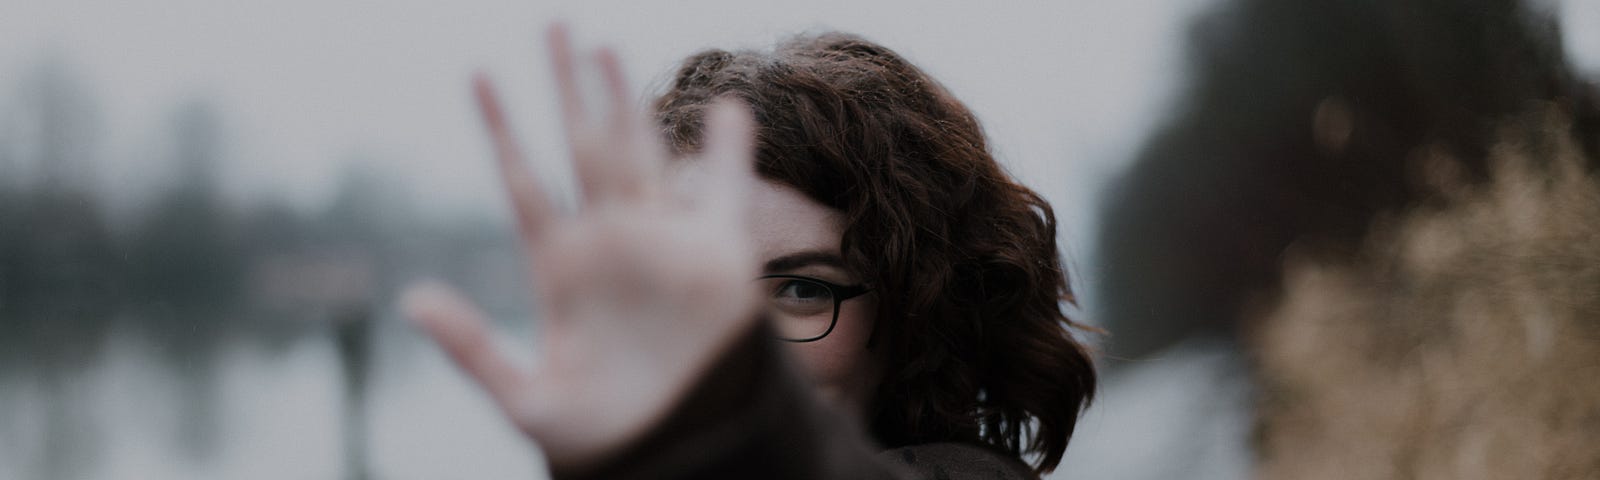 Woman with glasses putting hand up with her palm towards the camera.